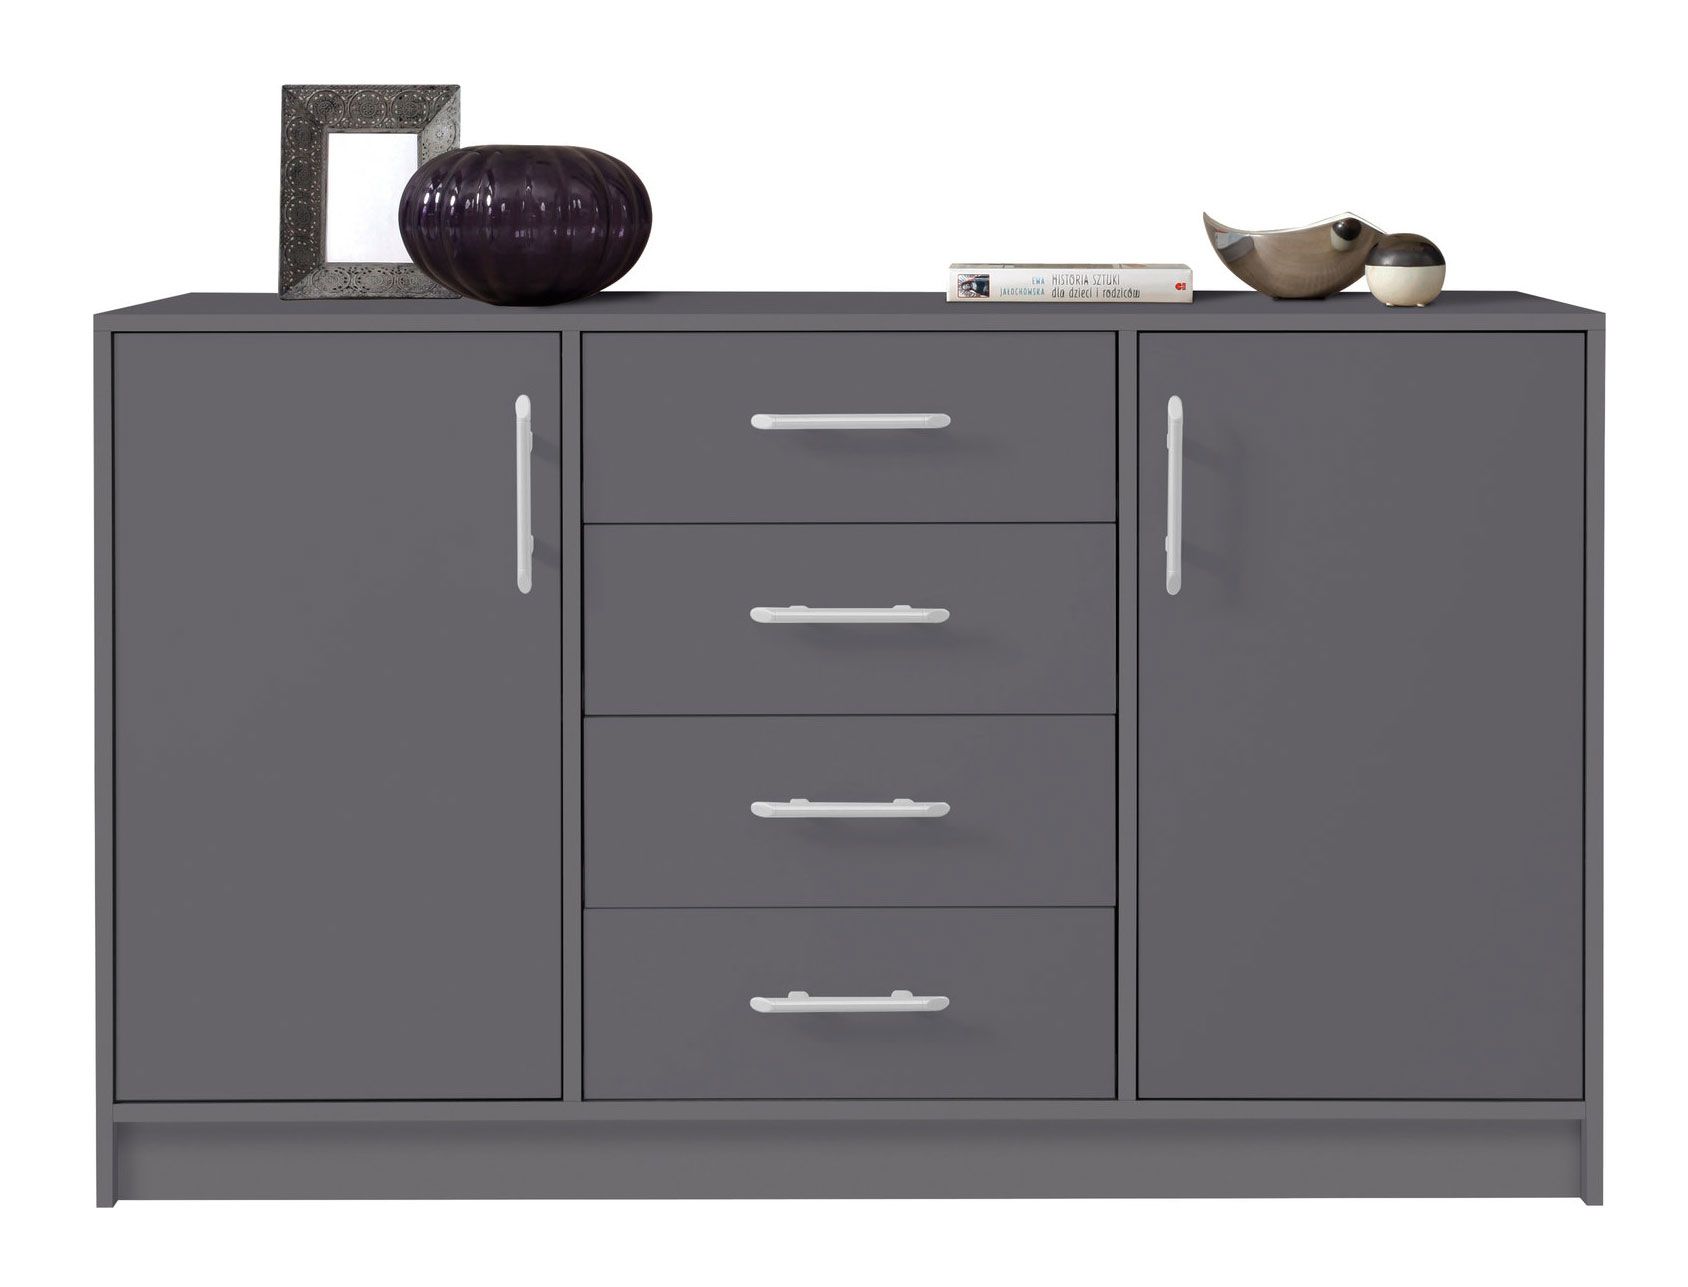 Simple sideboard Hannut 48, color: anthracite - Dimensions: 84 x 140 x 40 cm (H x W x D)